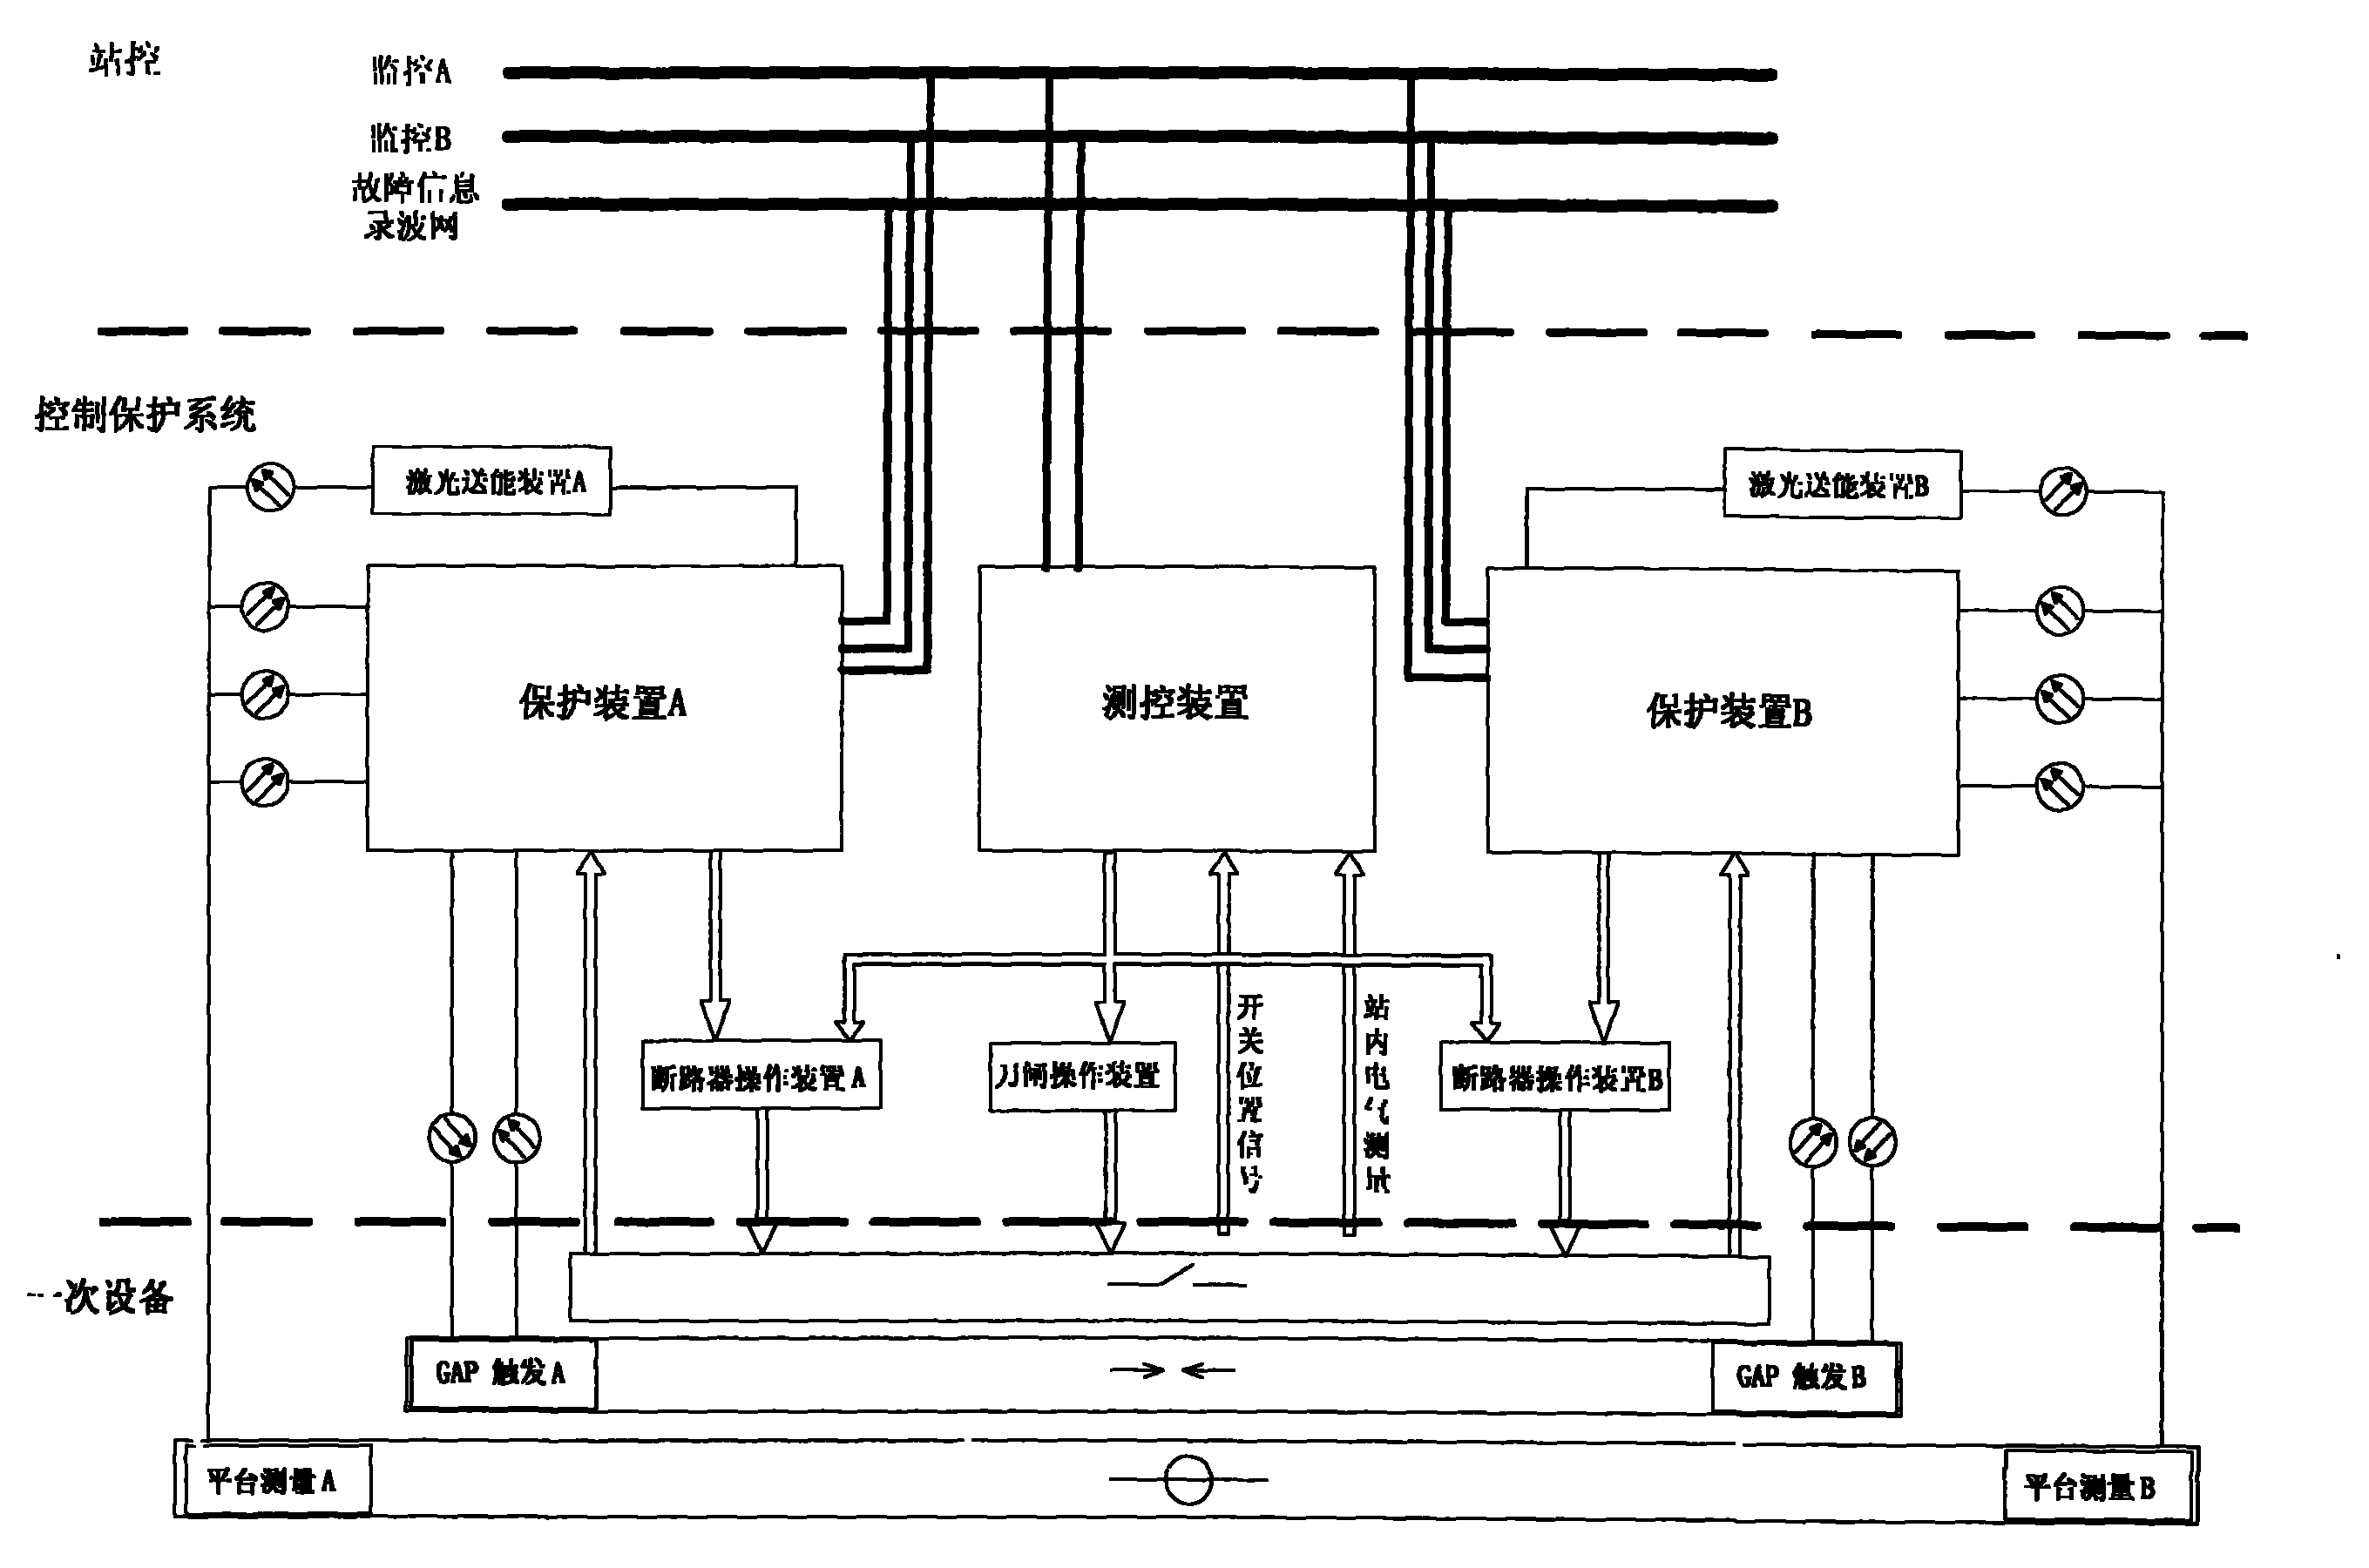 Control and protection system of series compensation device or fault current limiter